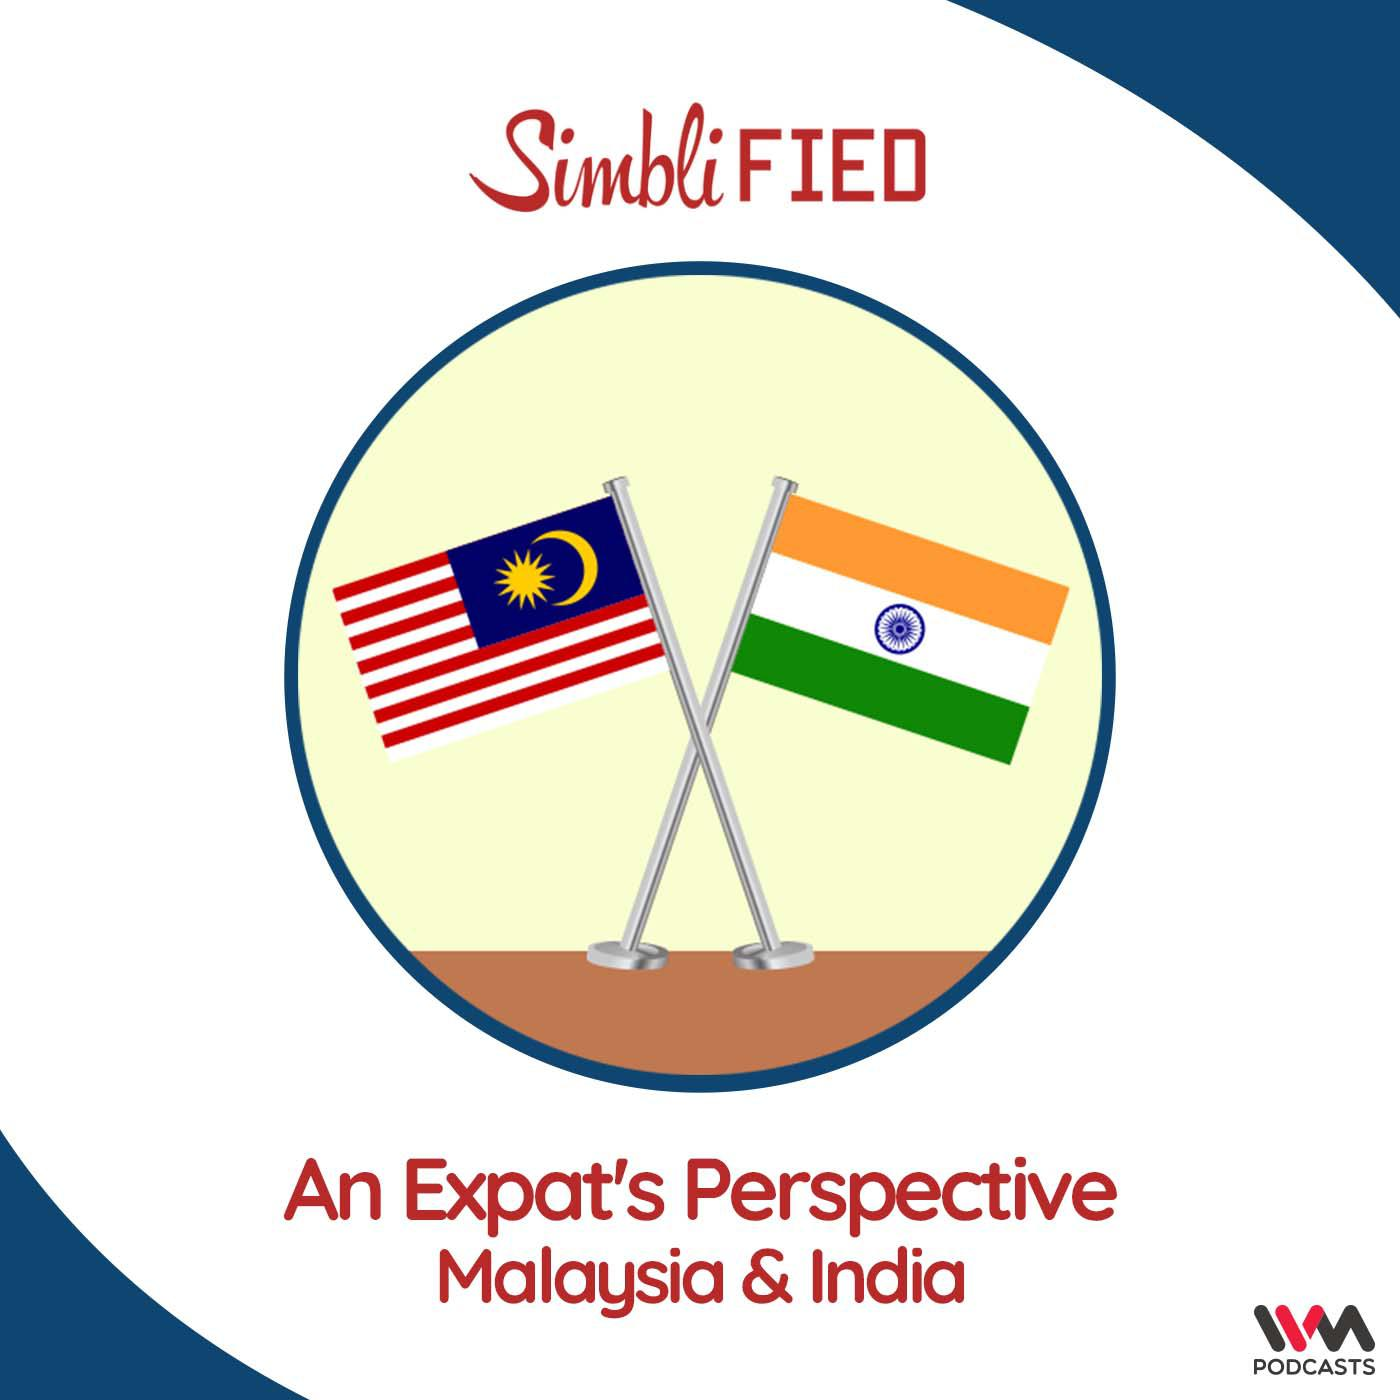 An Expat’s Perspective: Malaysia & India